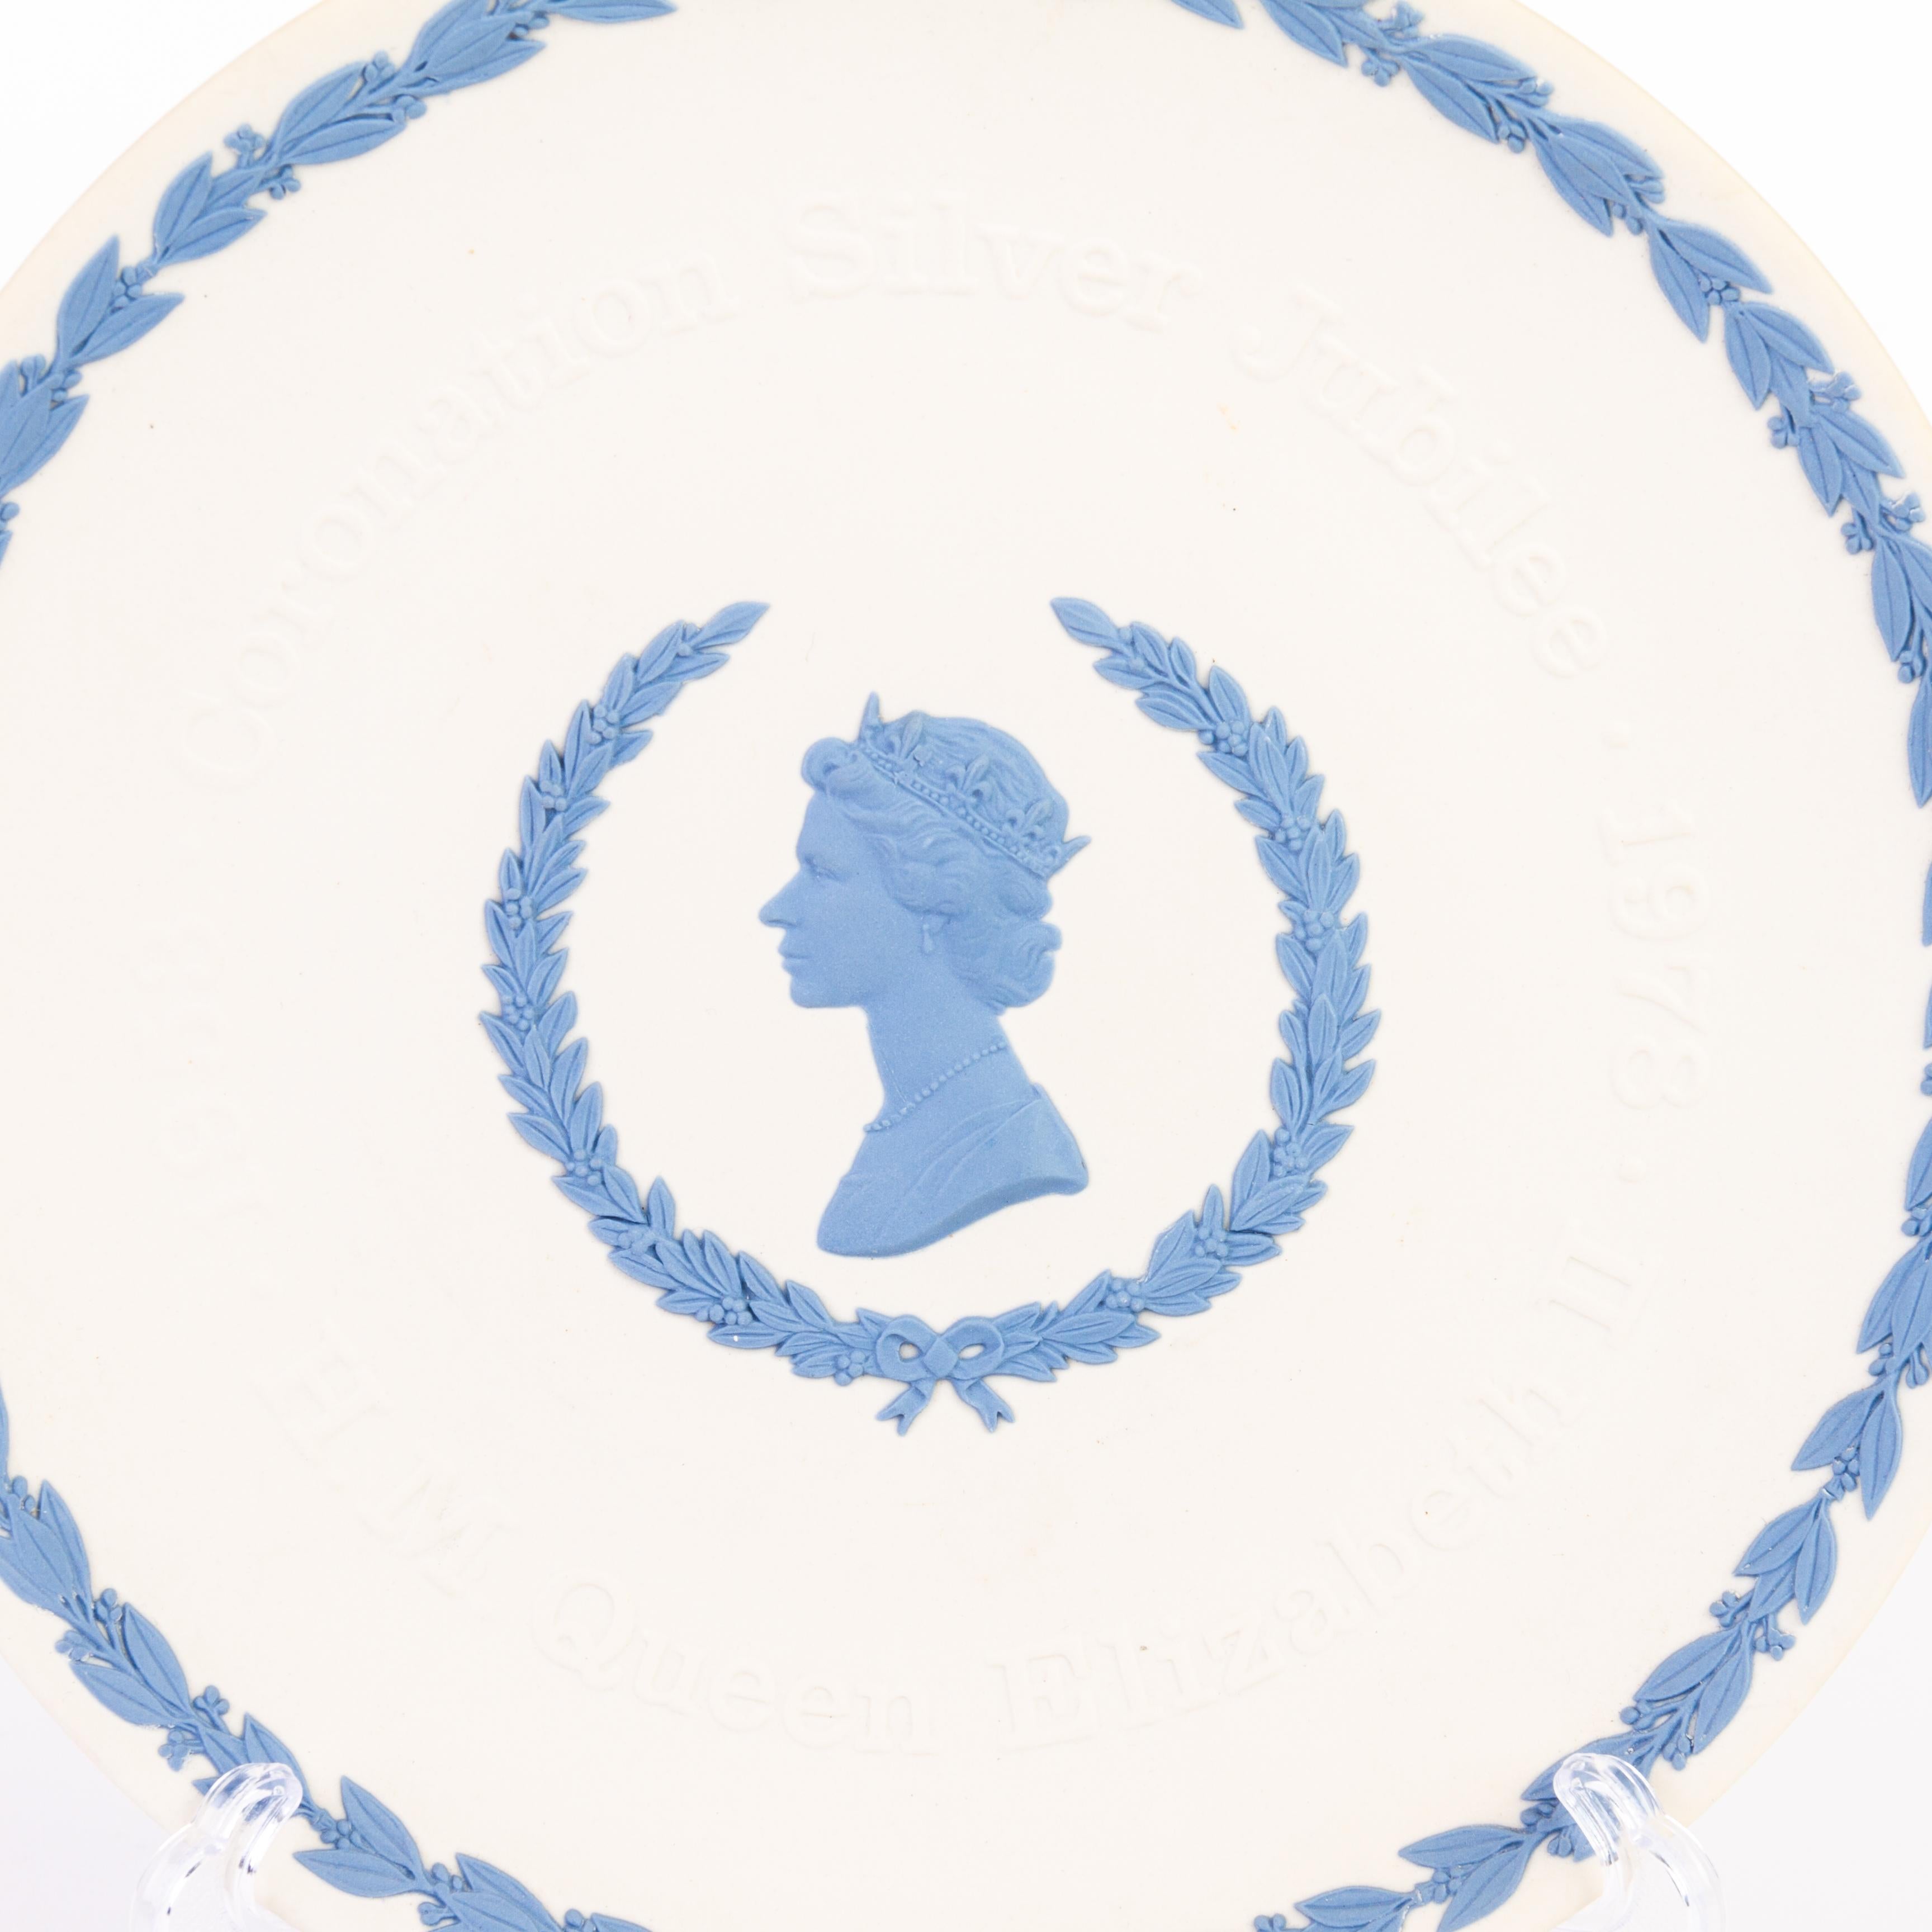 From a private collection.
Free international shipping
Wedgwood Jasperware Queen Elizabeth II Portrait Plate 